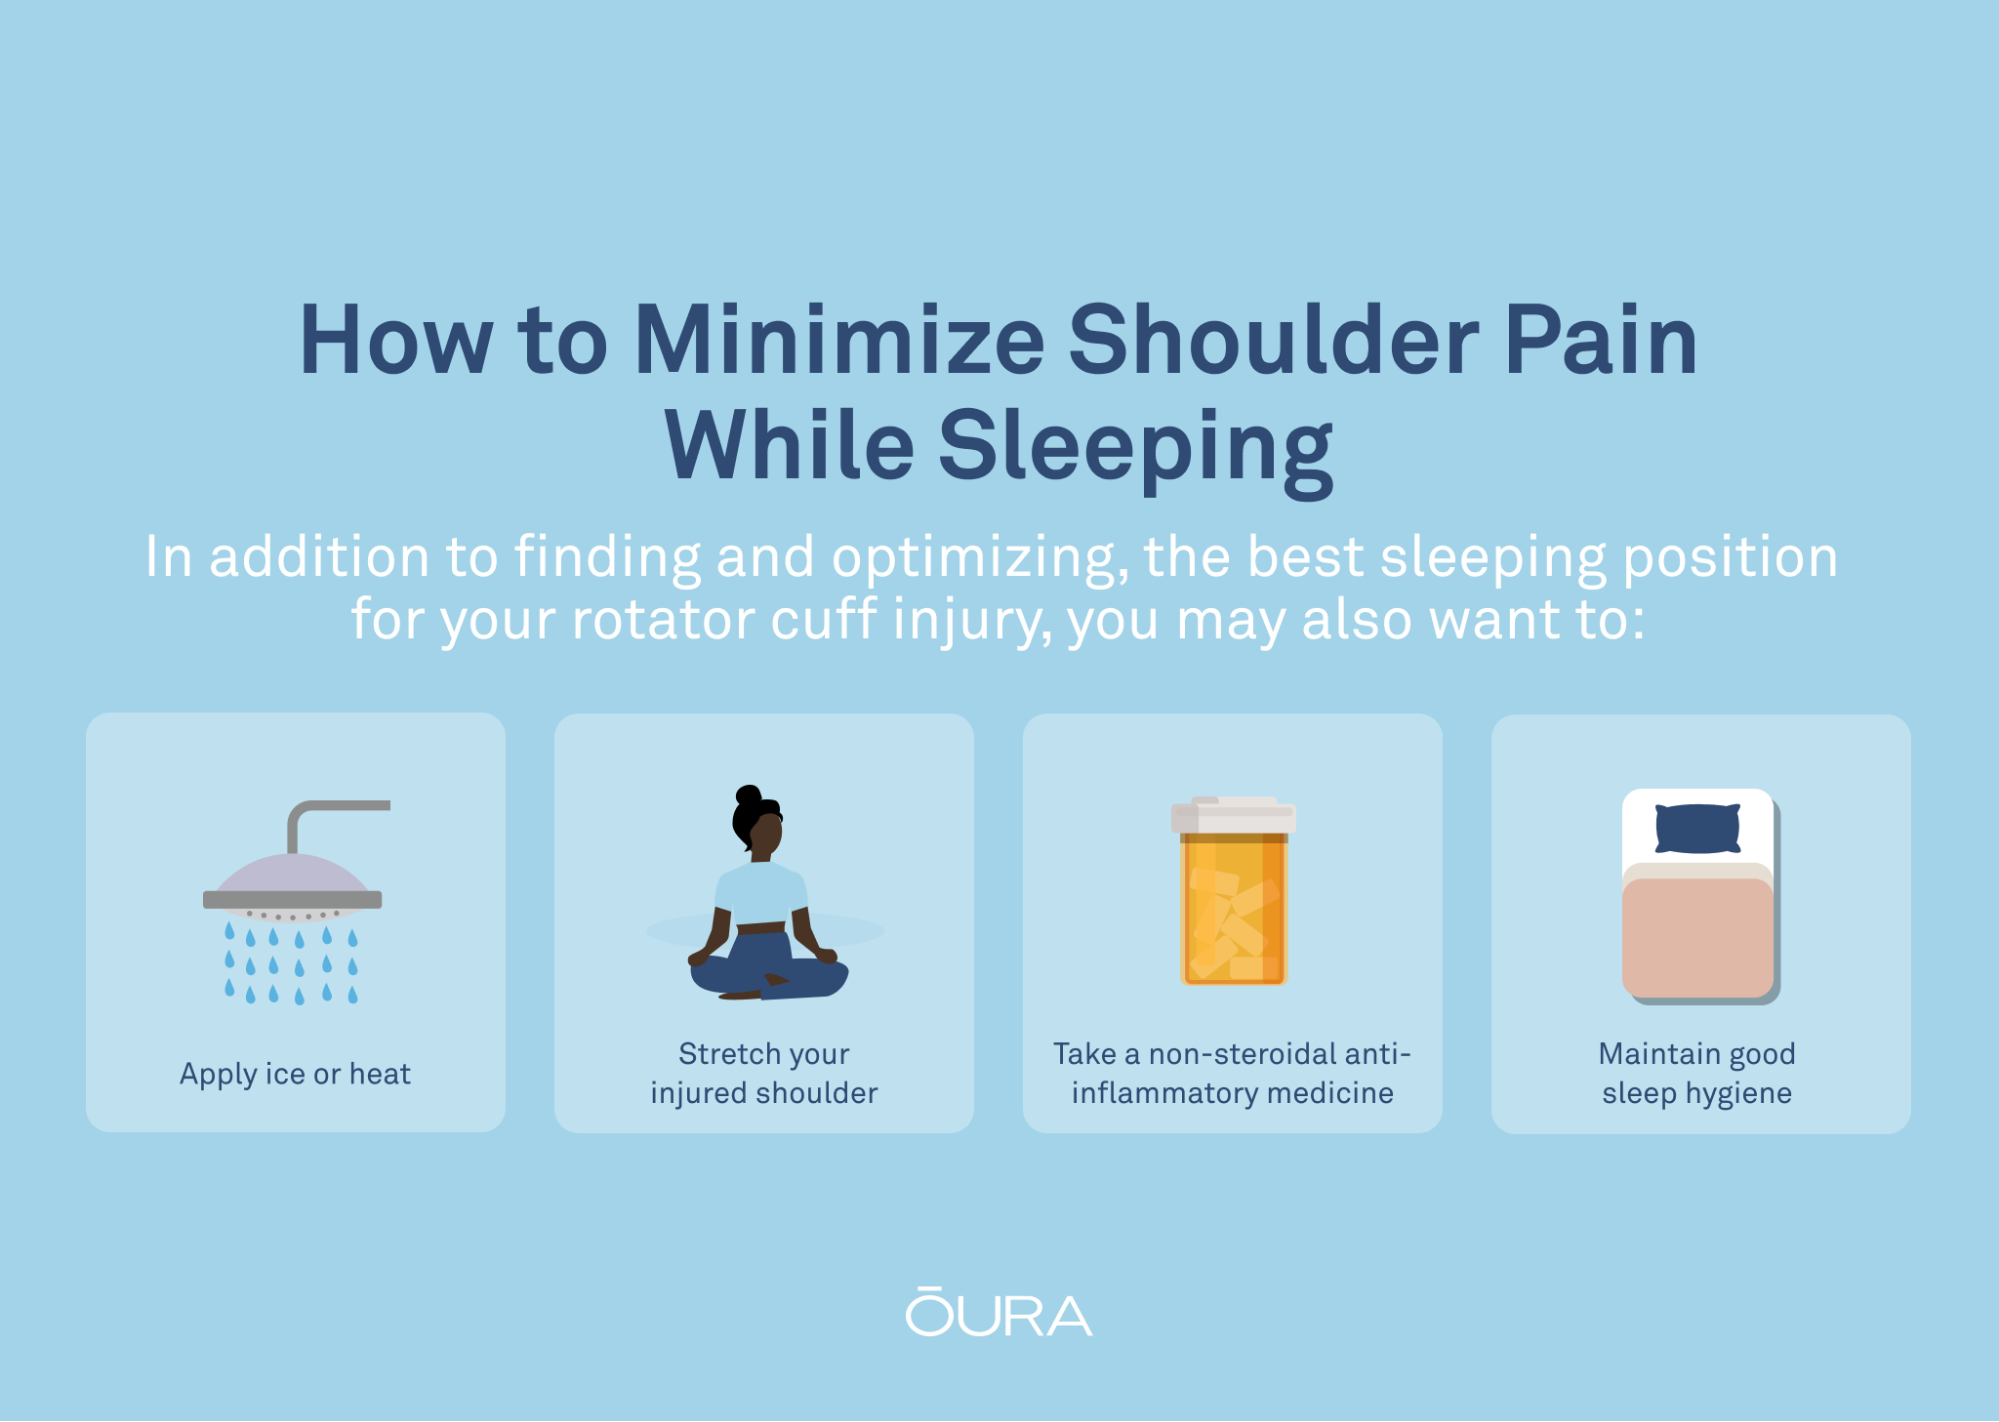 How to Minimize Shoulder Pain While Sleeping